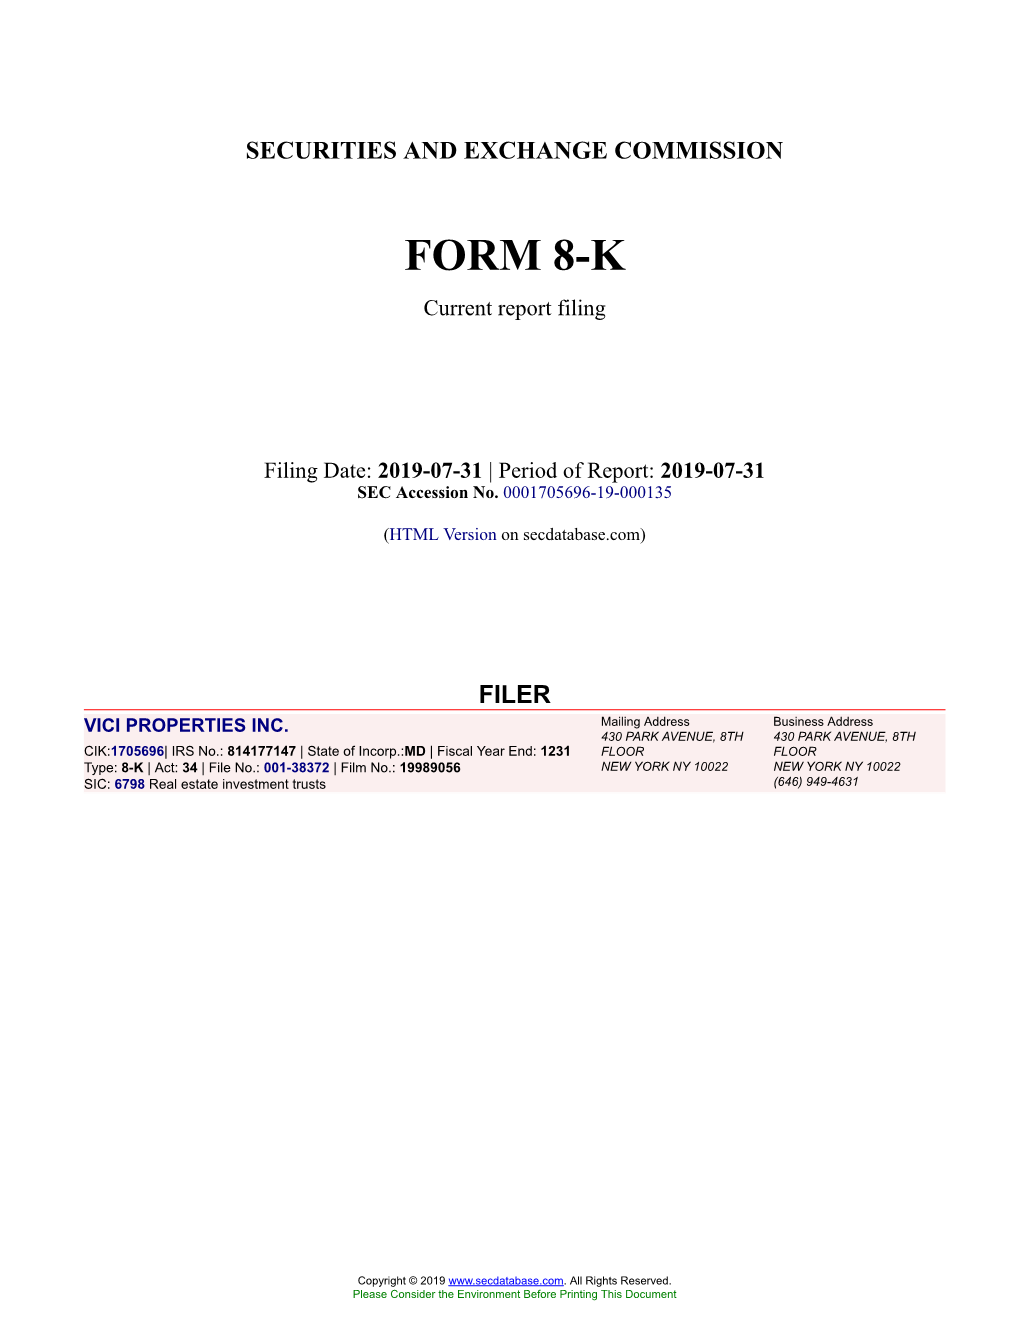 VICI PROPERTIES INC. Form 8-K Current Event Report Filed 2019-07-31